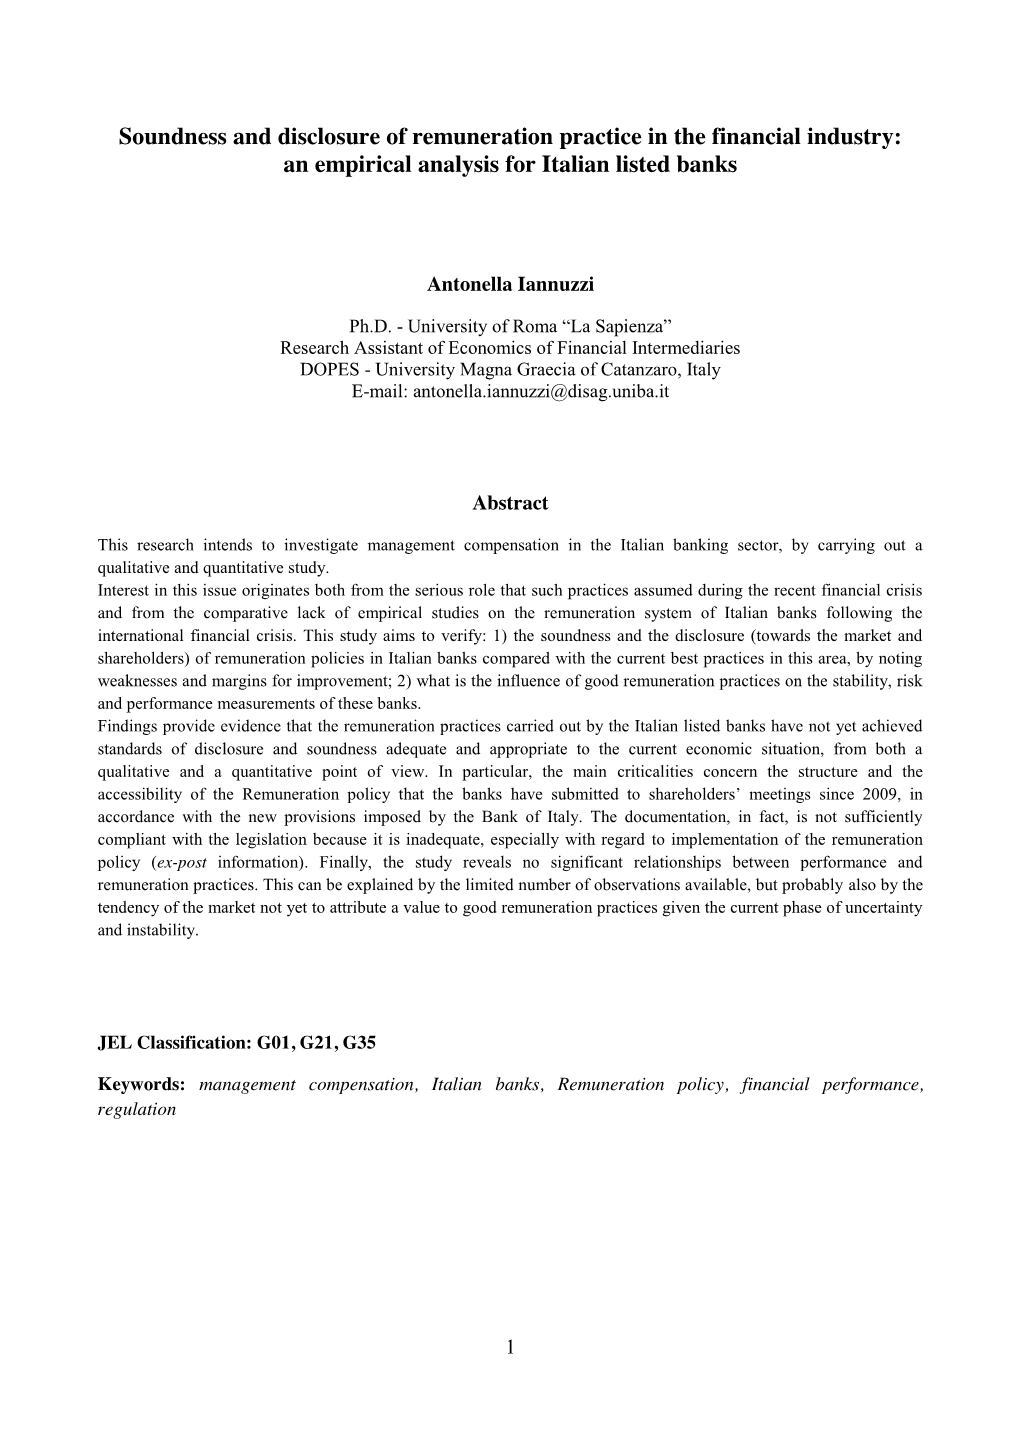 Soundness and Disclosure of Remuneration Practice in the Financial Industry: an Empirical Analysis for Italian Listed Banks